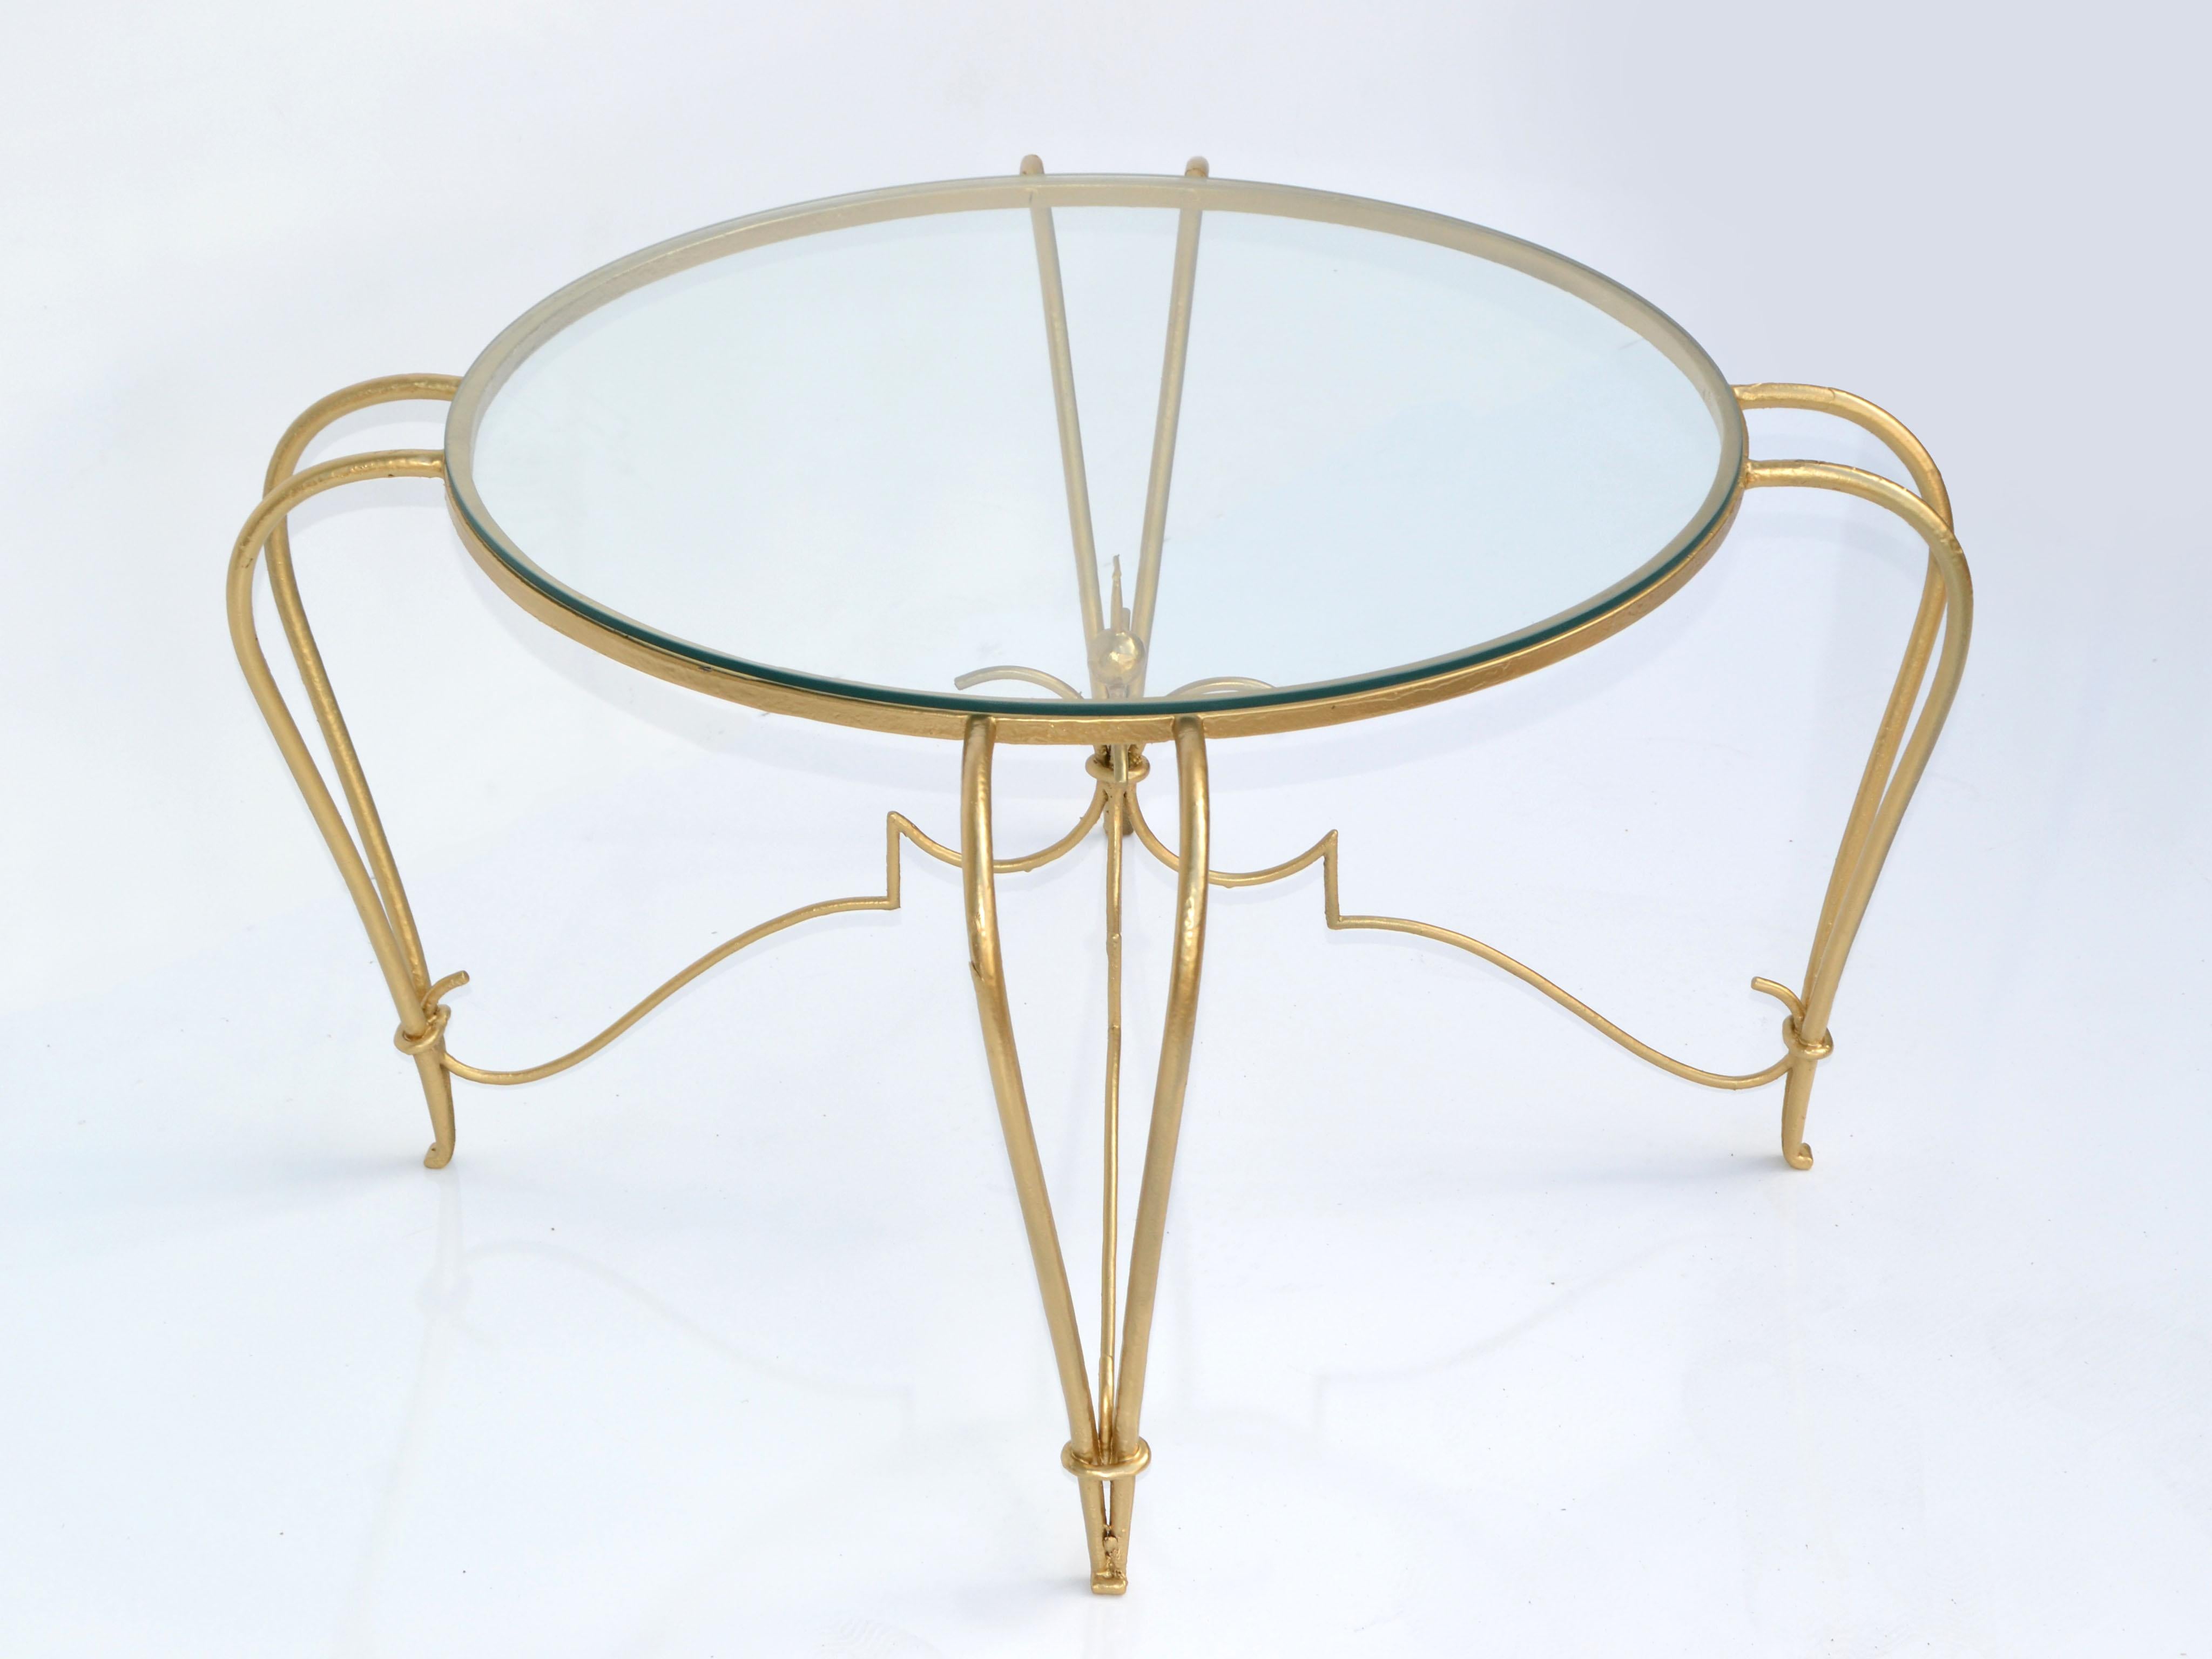 20th Century Art Deco Gold Finish Round Wrought Iron & Glass Top Cocktail Table, France, 1950 For Sale